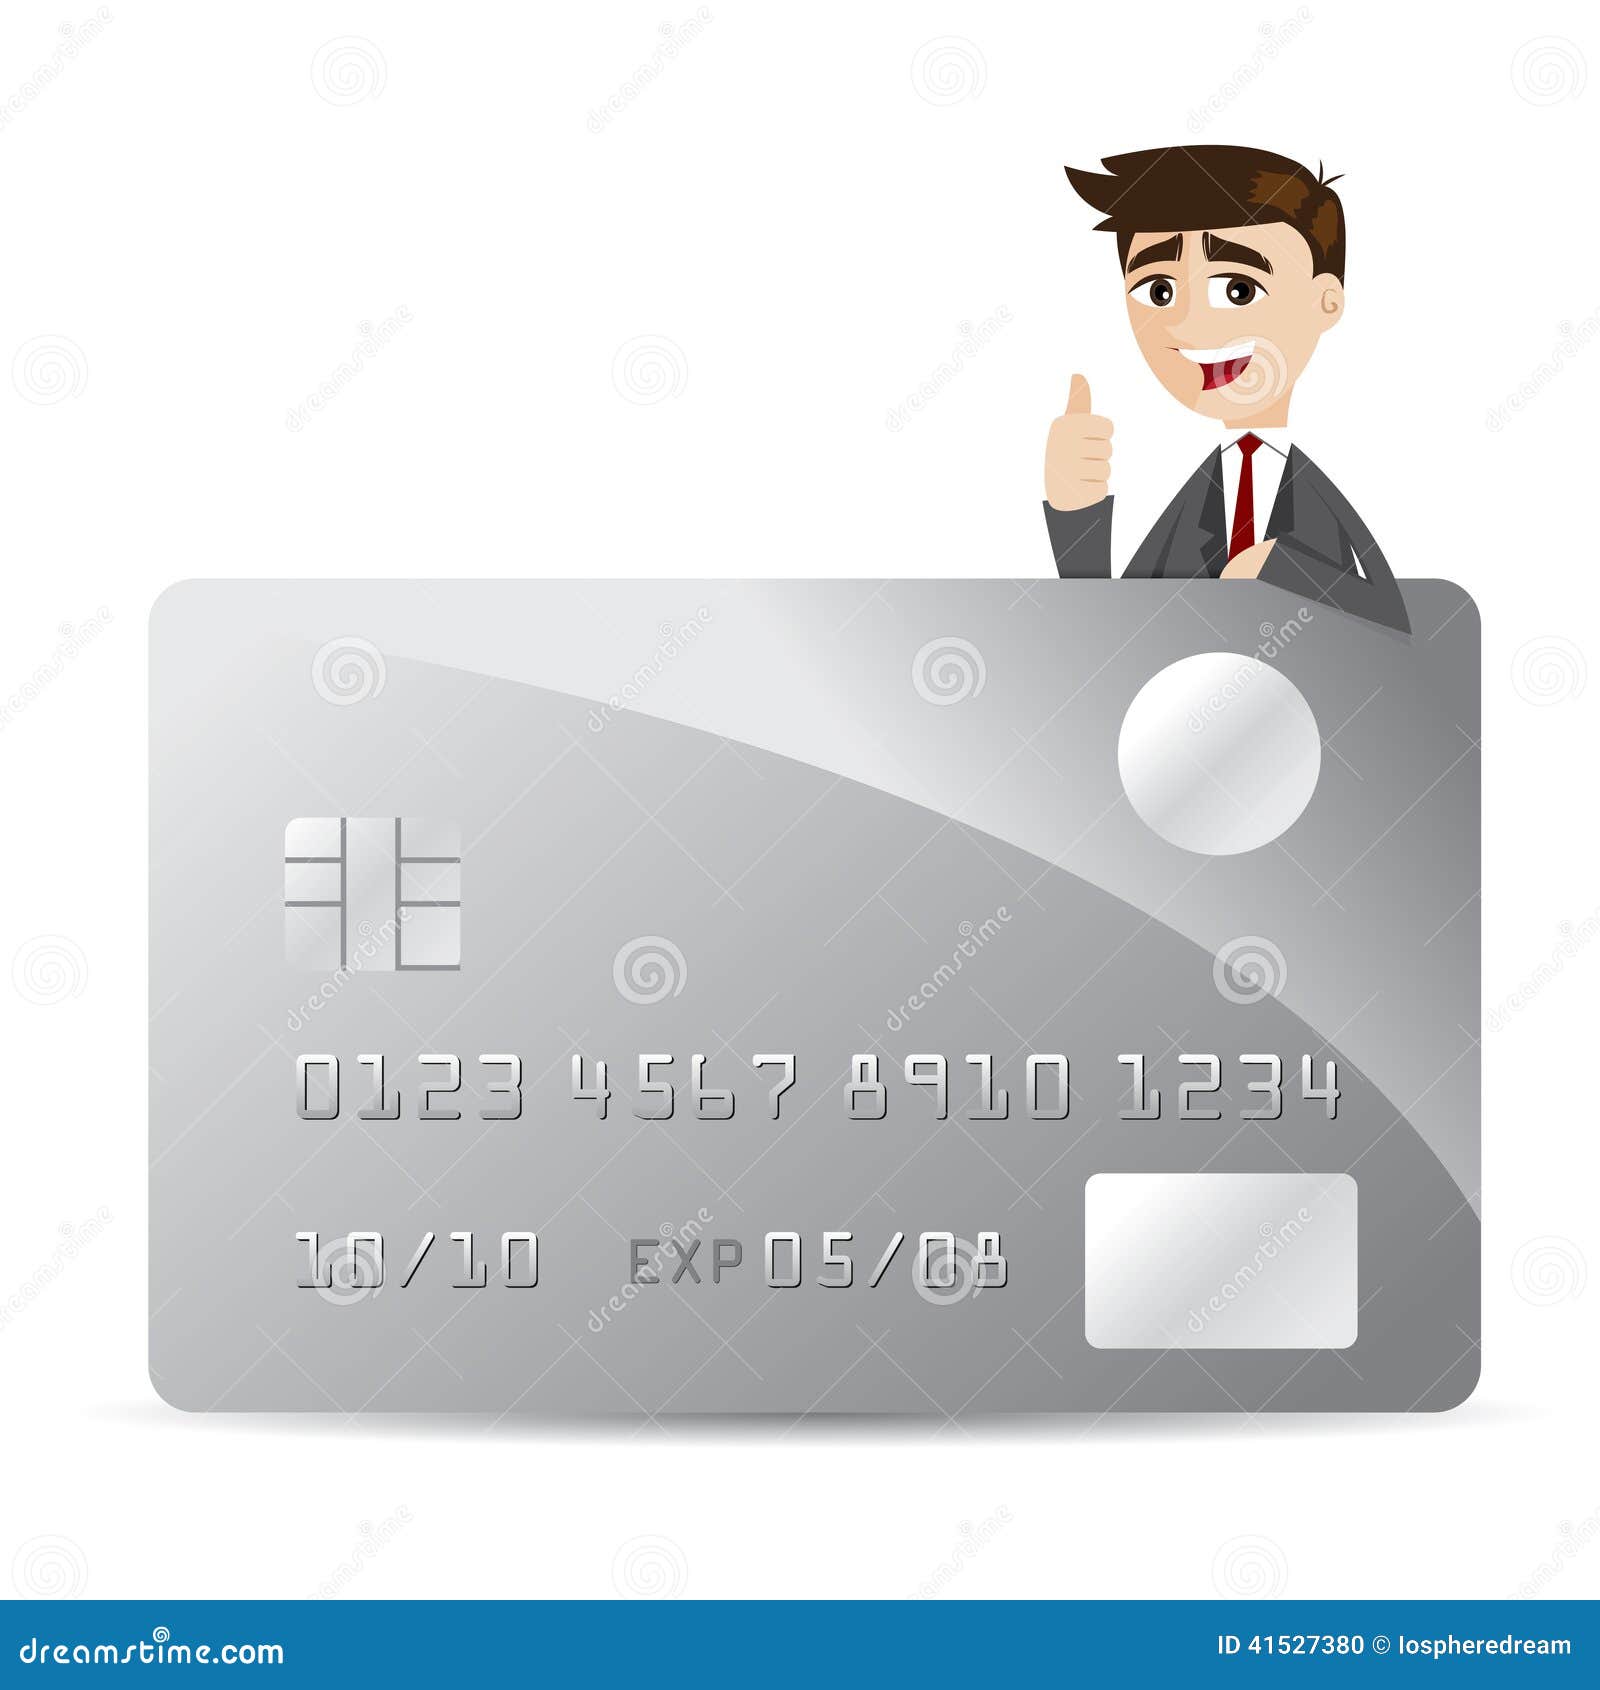 Cartoon Businessman with Credit Card Stock Vector - Illustration of